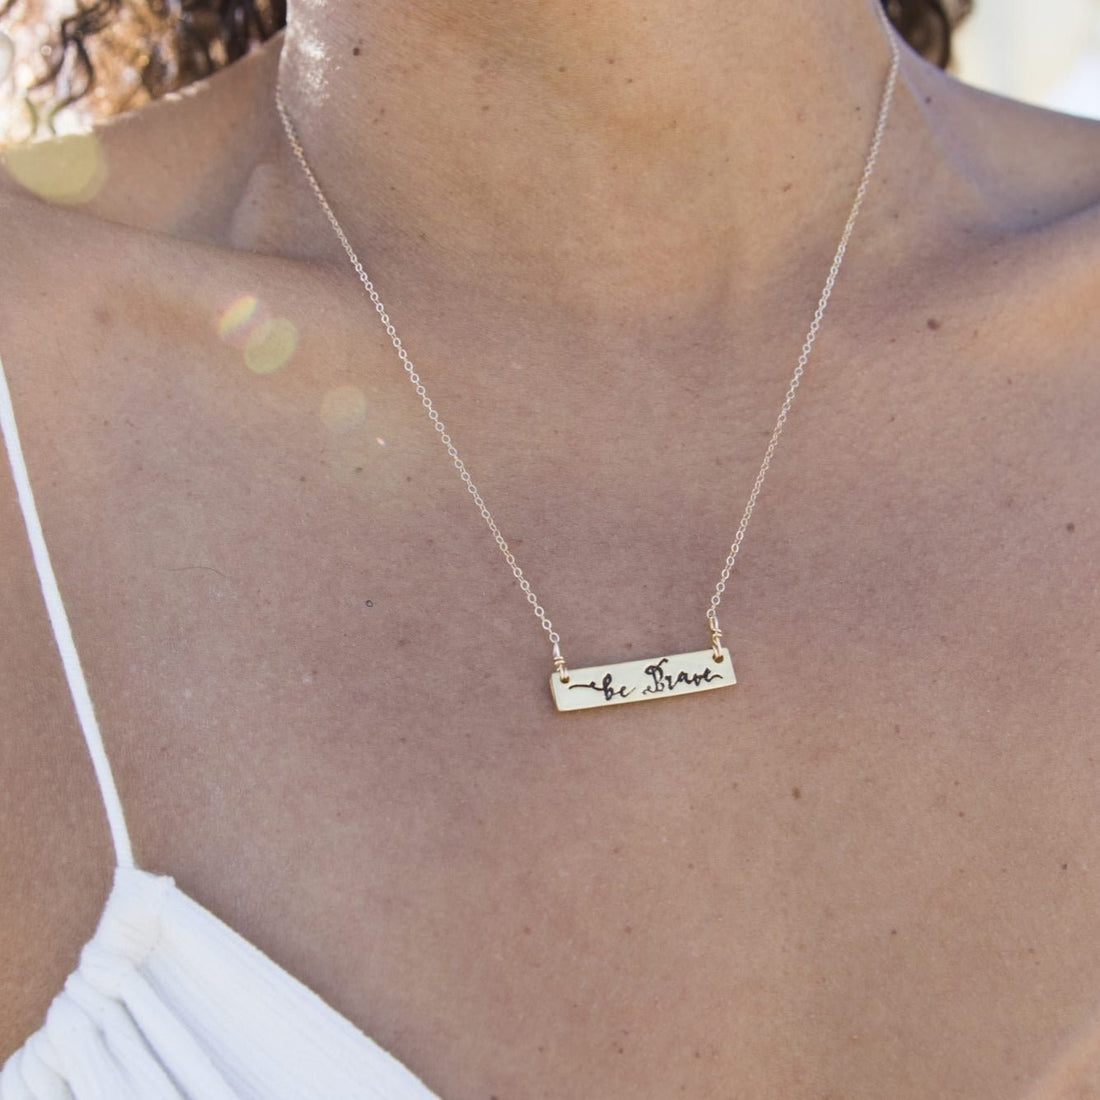 Be Brave / Arrow Reversible Mantra Necklace - Chocolate and Steel